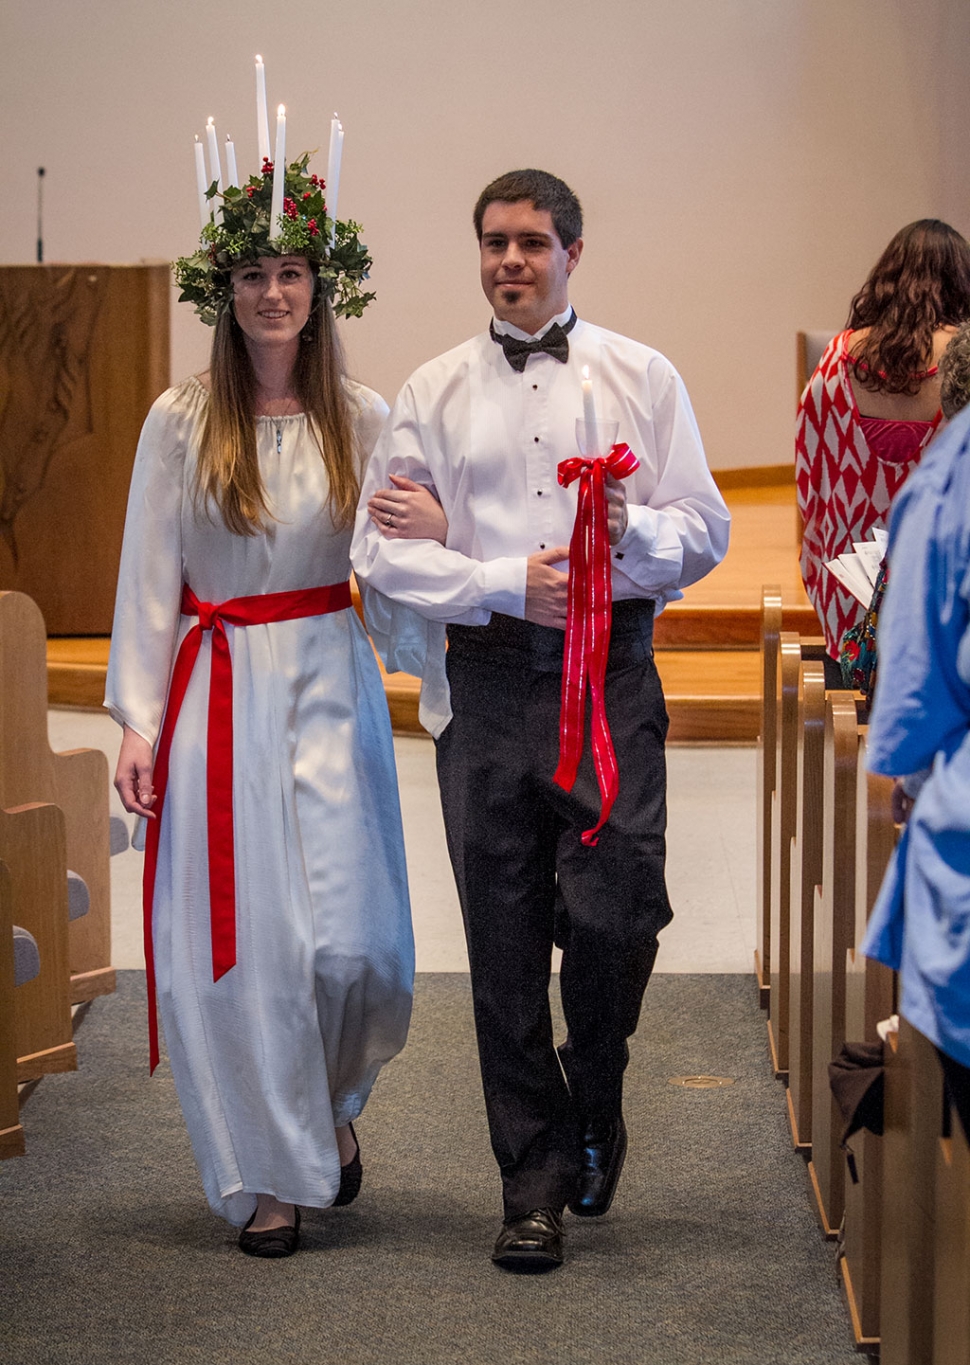 Jamie Morriss as Lucia and her escort, Alex Powell, during the 2012 Sankta Lucia Festival.